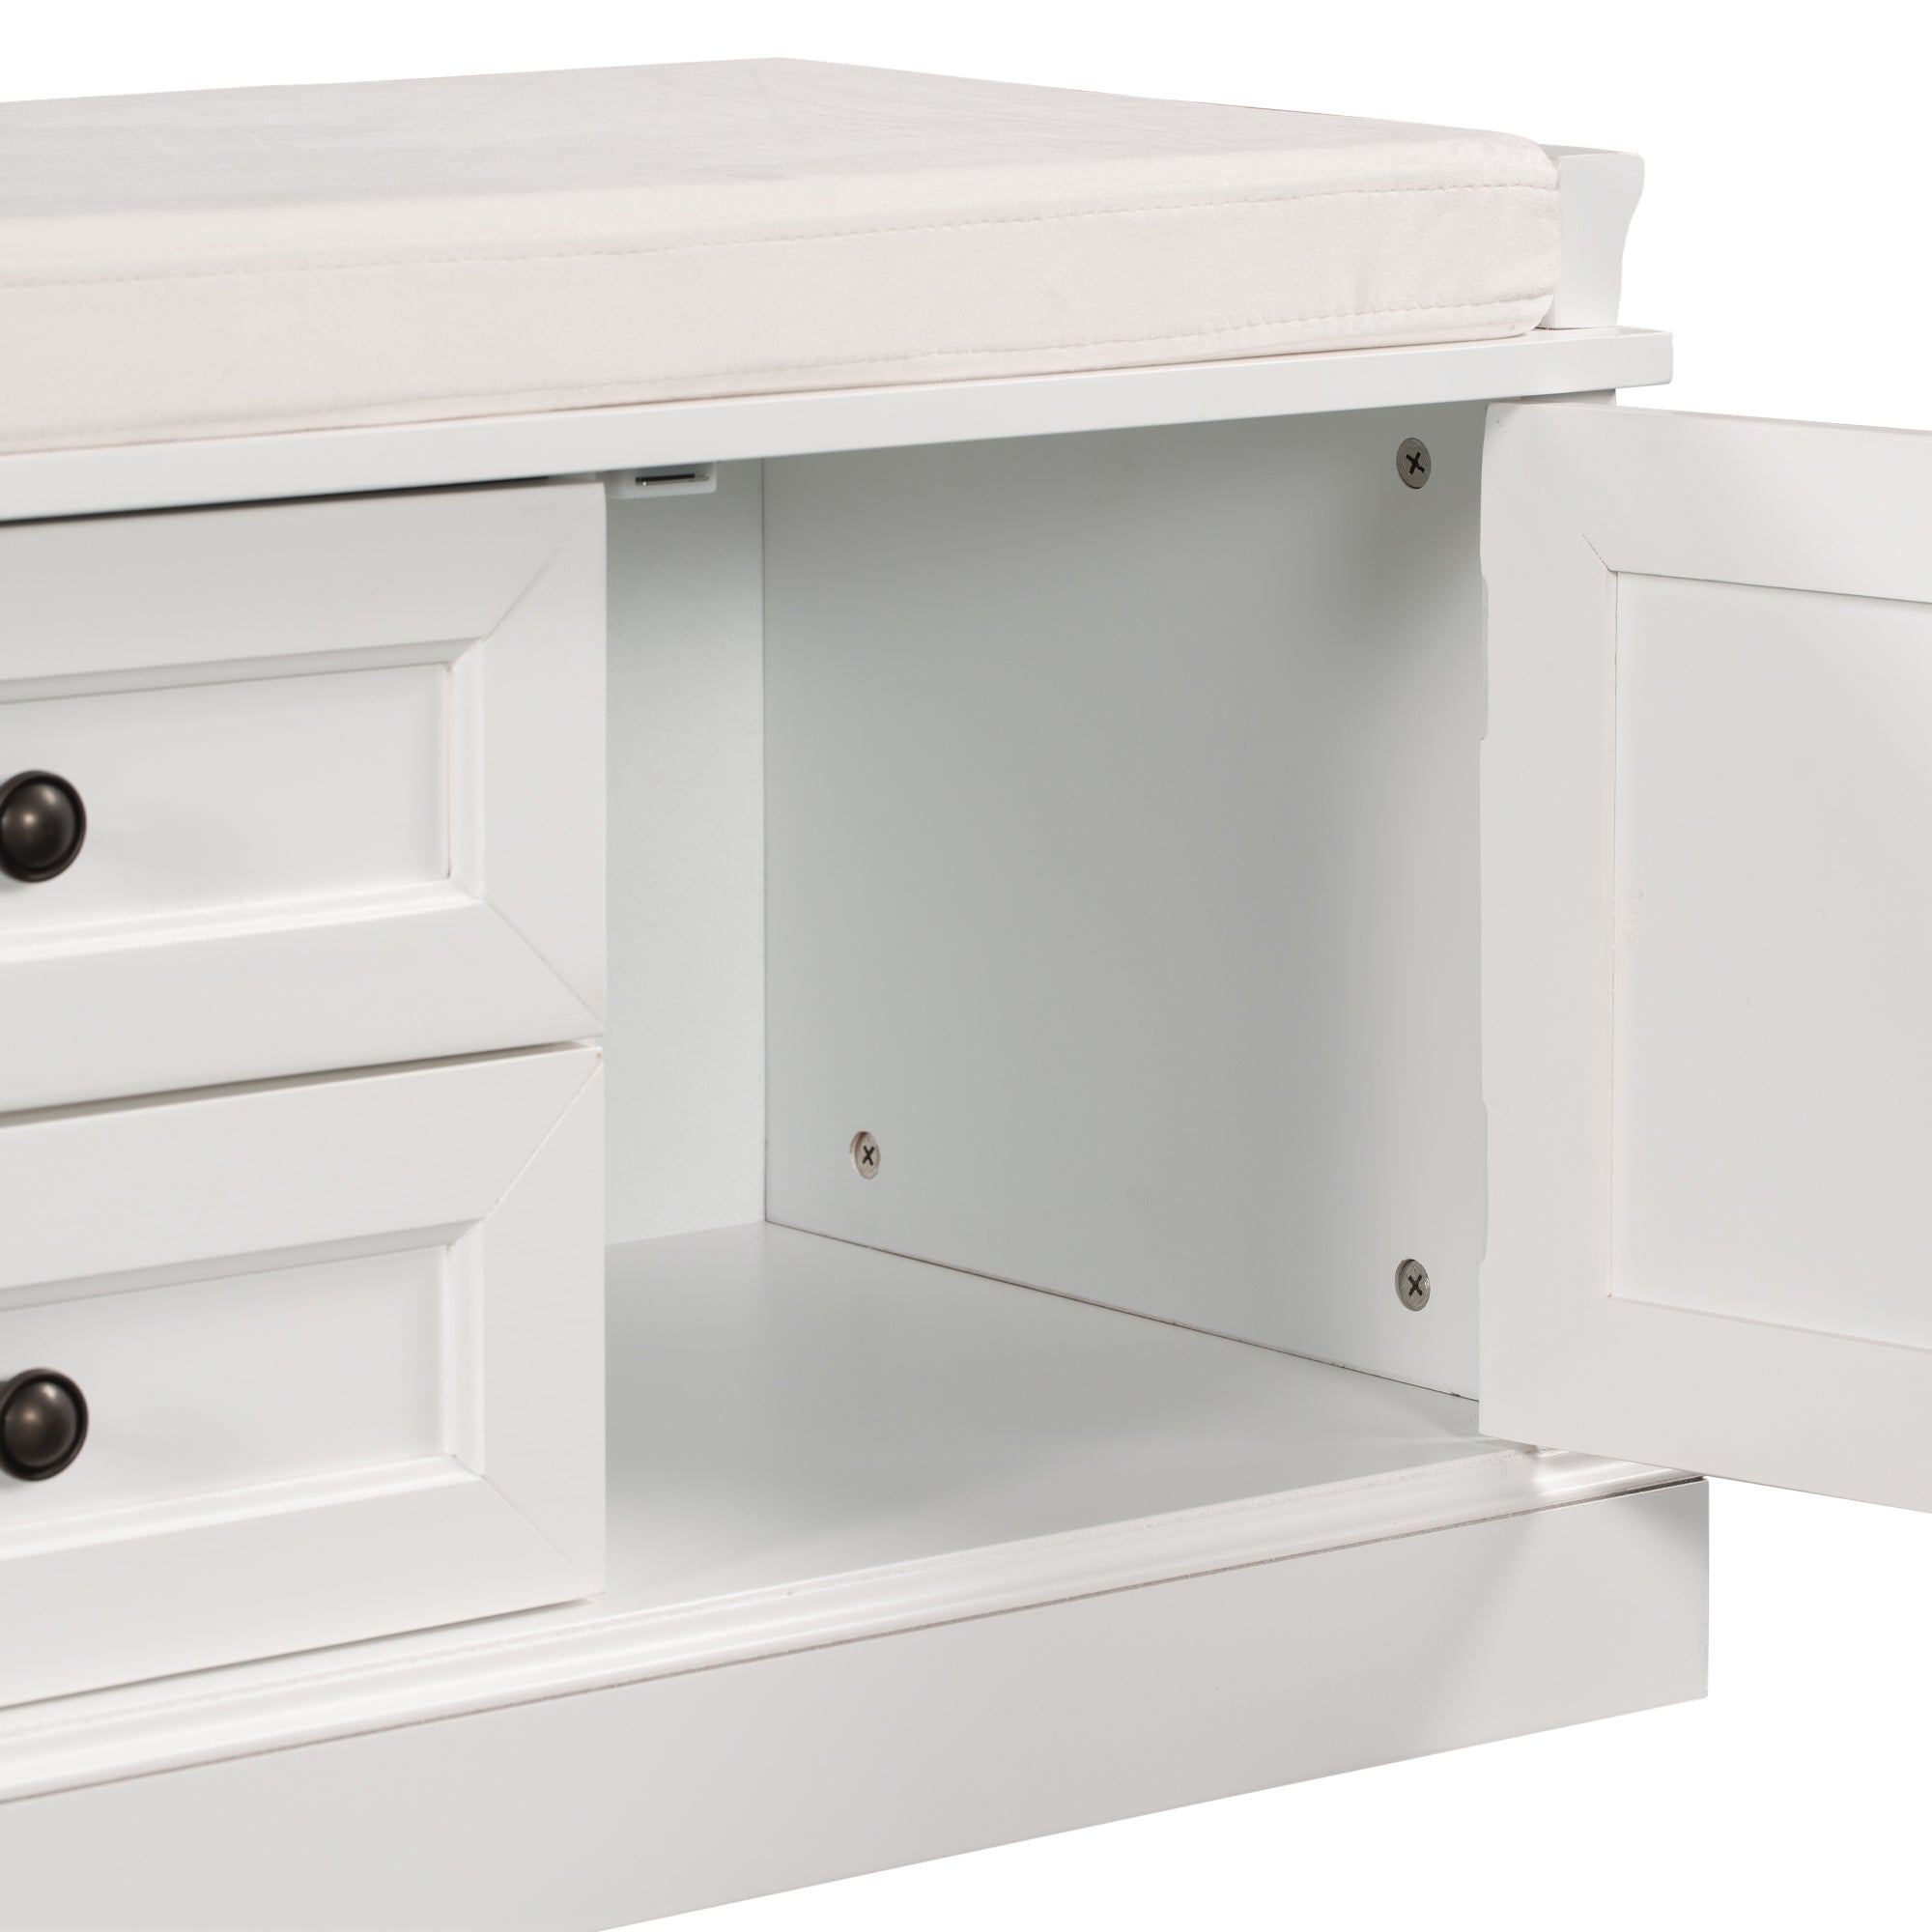 TREXM Storage Bench with Removable Cushion (White)